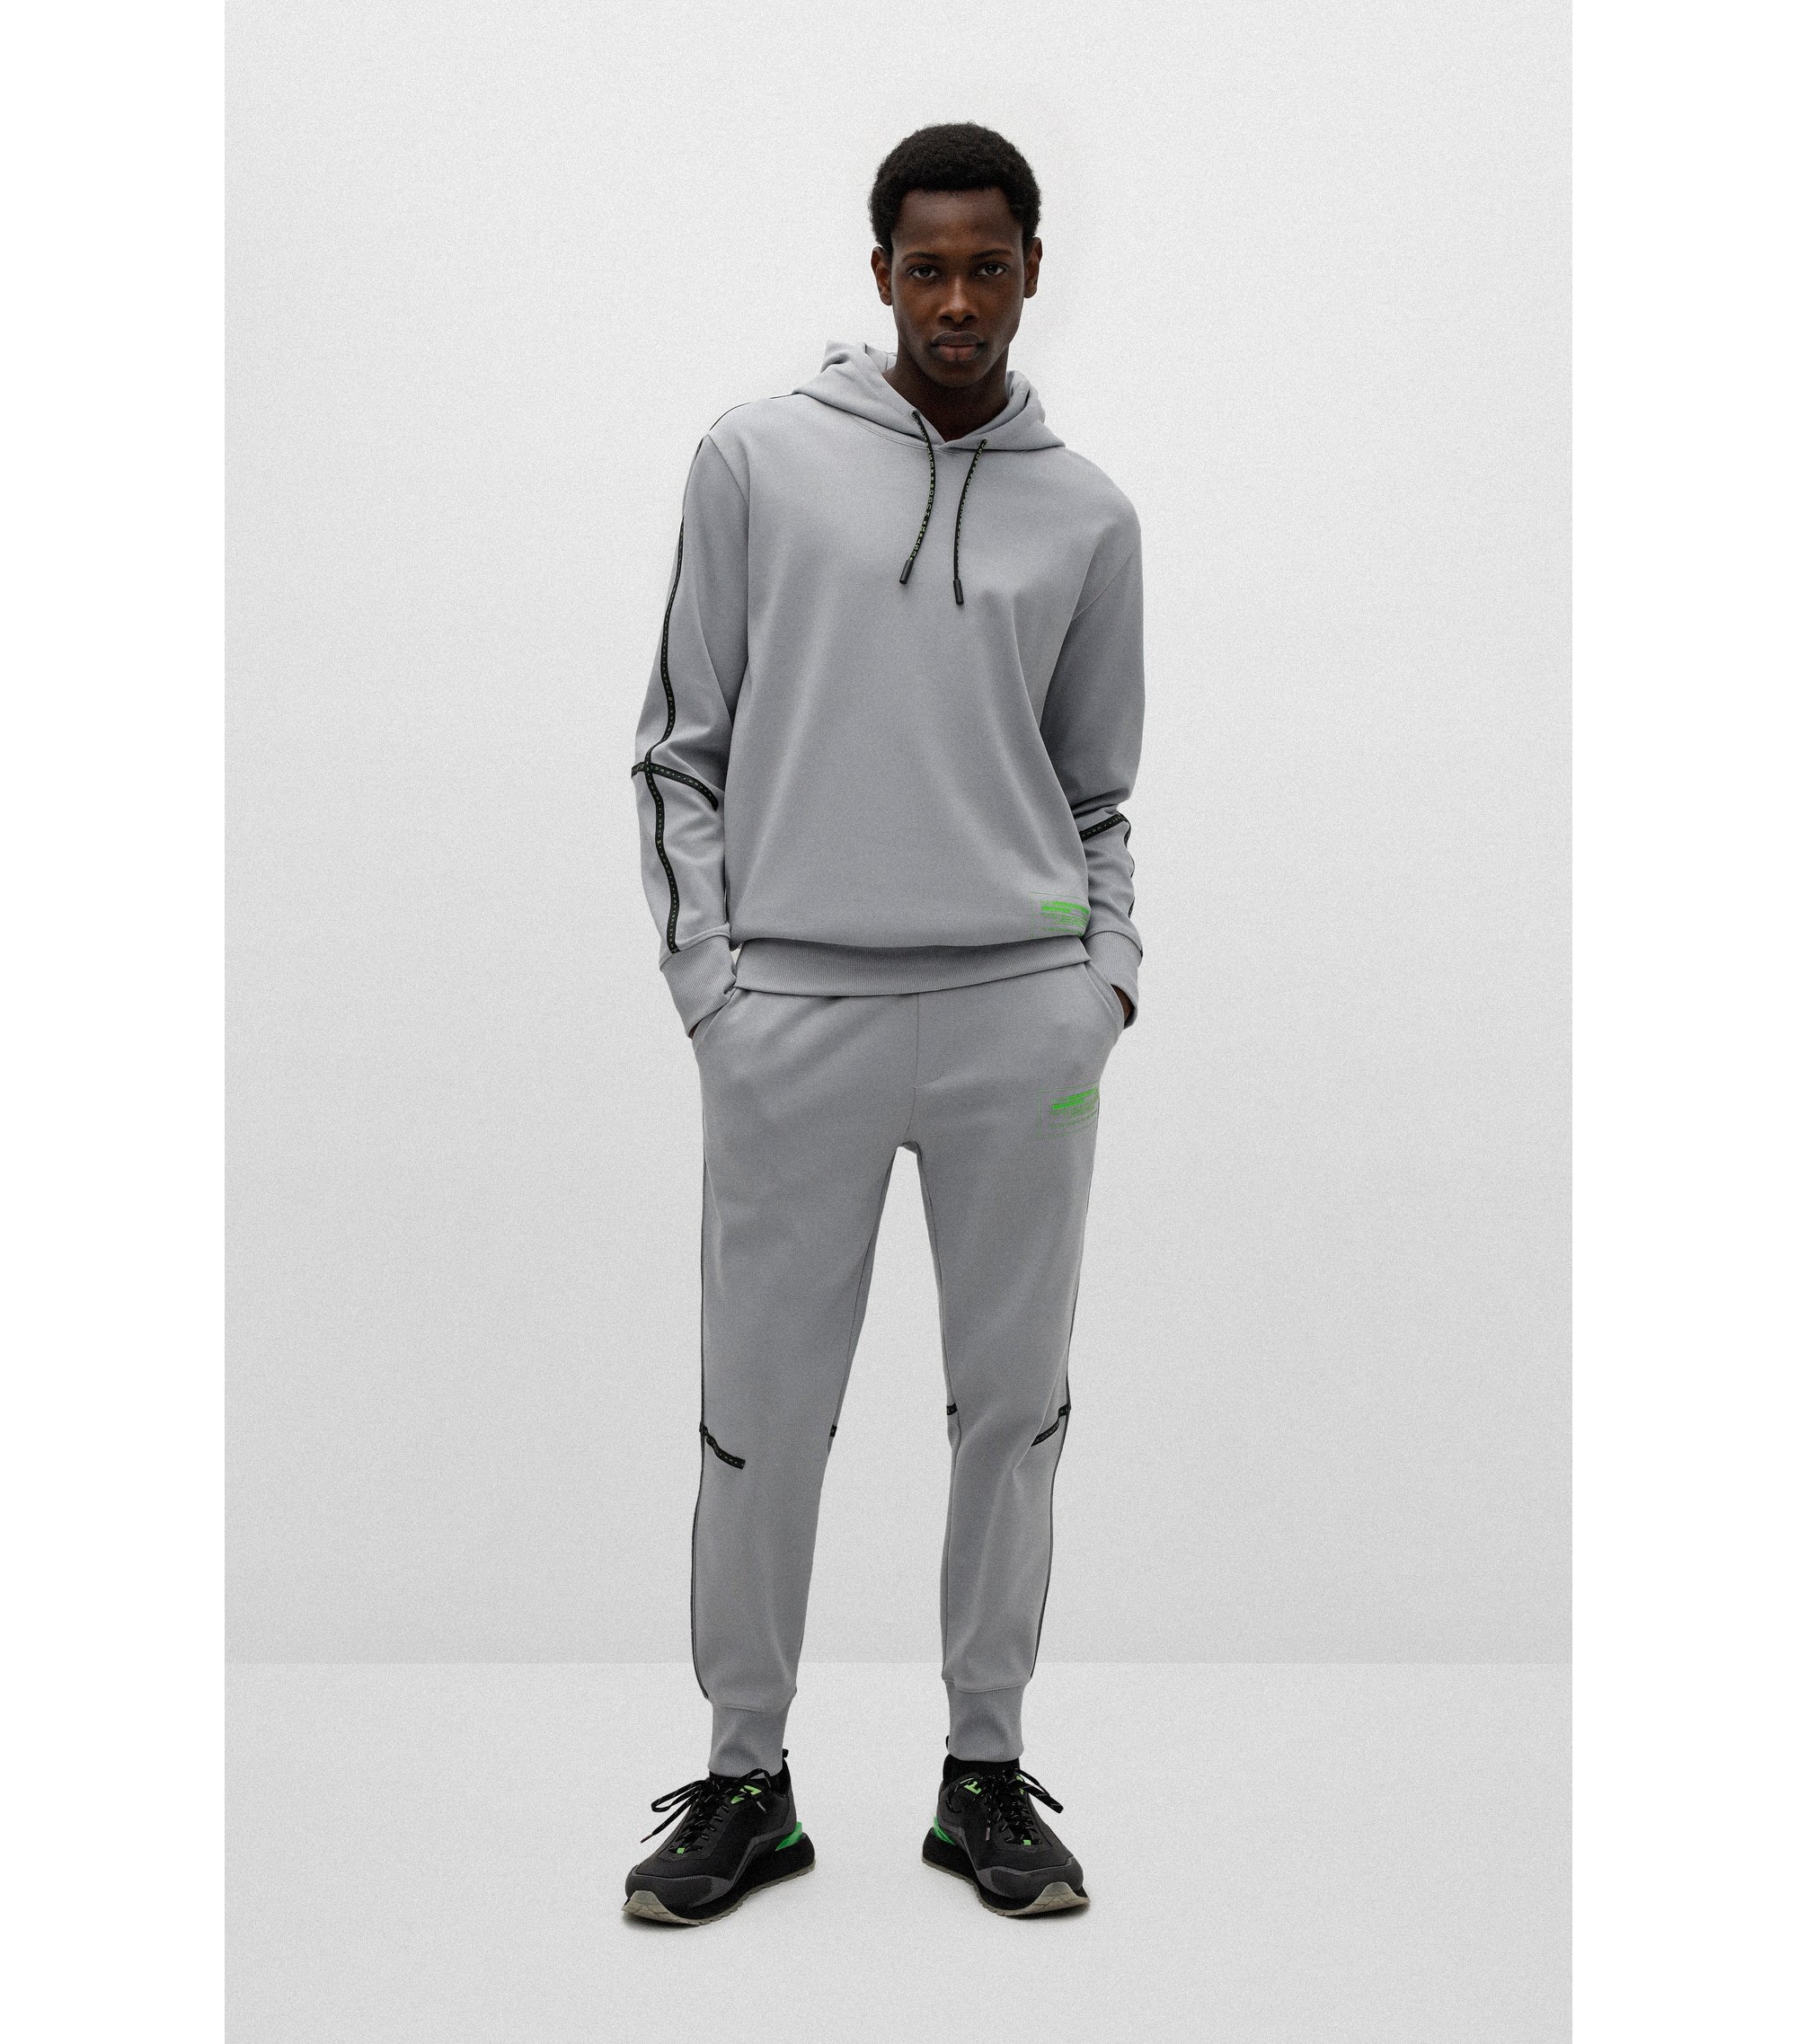 Hugo Boss FULL Tape Tracksuit Brand New With Tags Grey Men's ALL SIZES